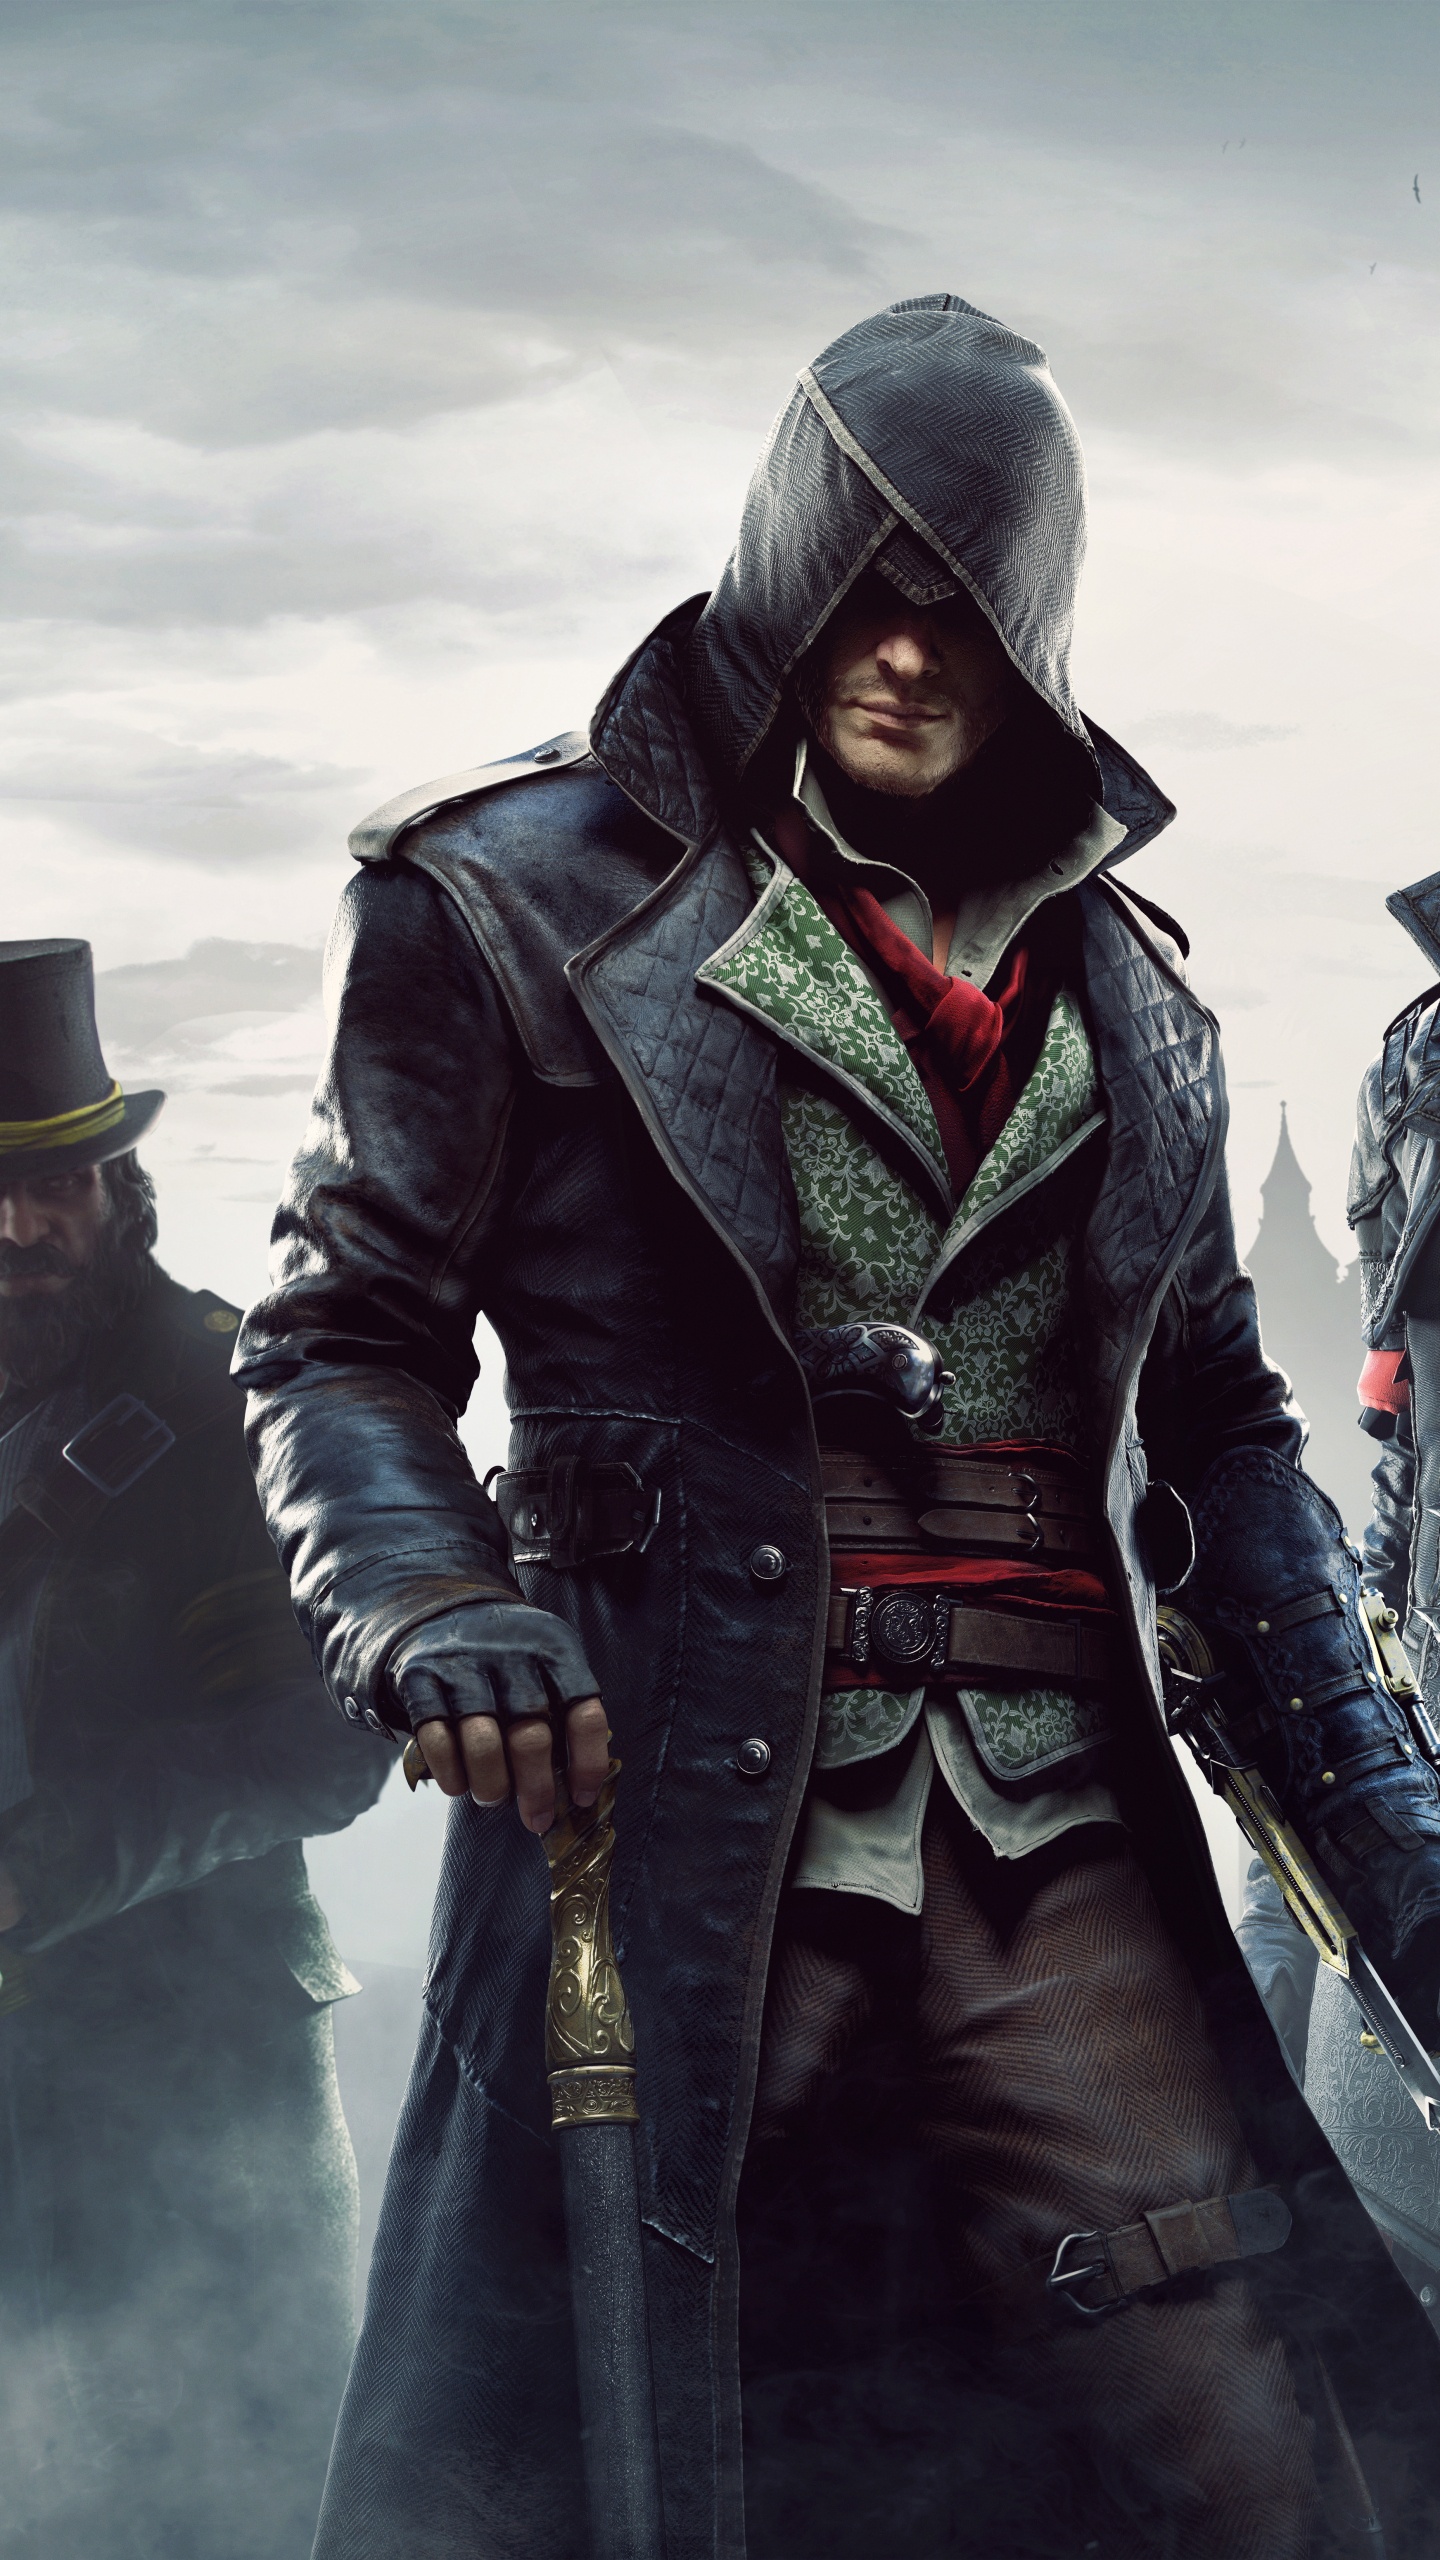 Assassins Creed Syndicate, Ubisoft, pc Game, Film, Assassins Creed Unity. Wallpaper in 1440x2560 Resolution